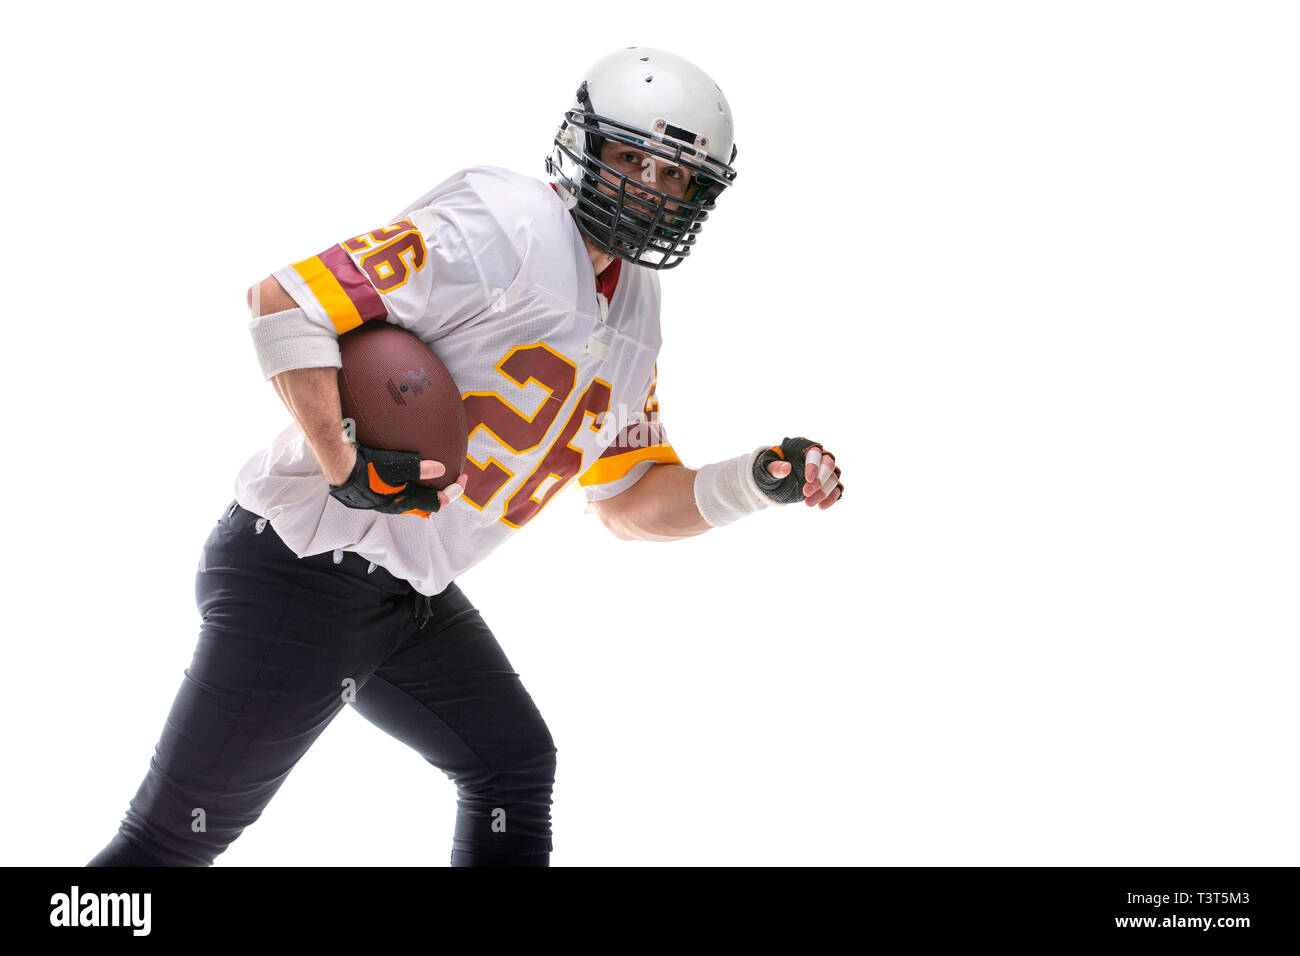 Bearded American football player in ation. Stock Photo